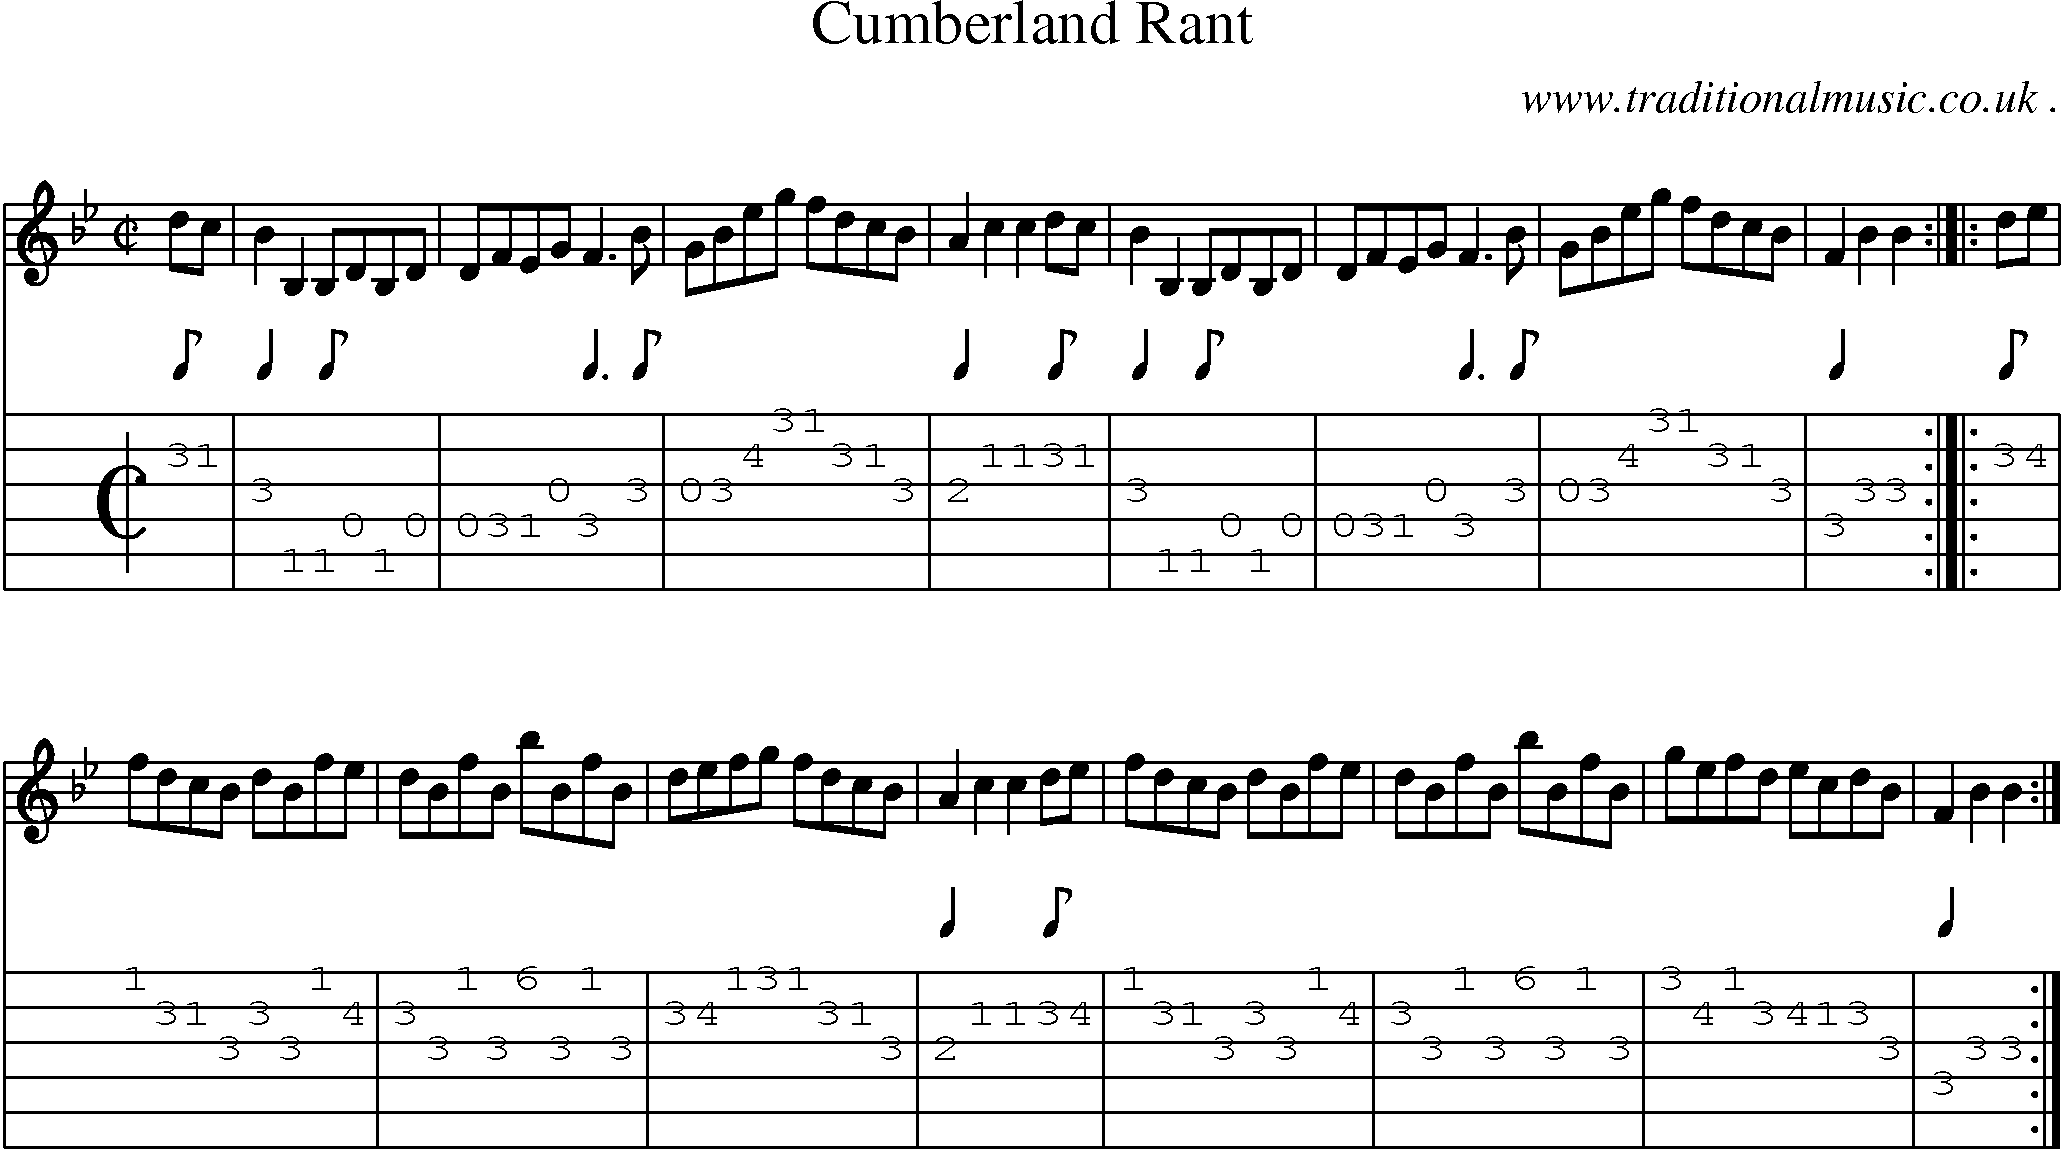 Sheet-Music and Guitar Tabs for Cumberland Rant